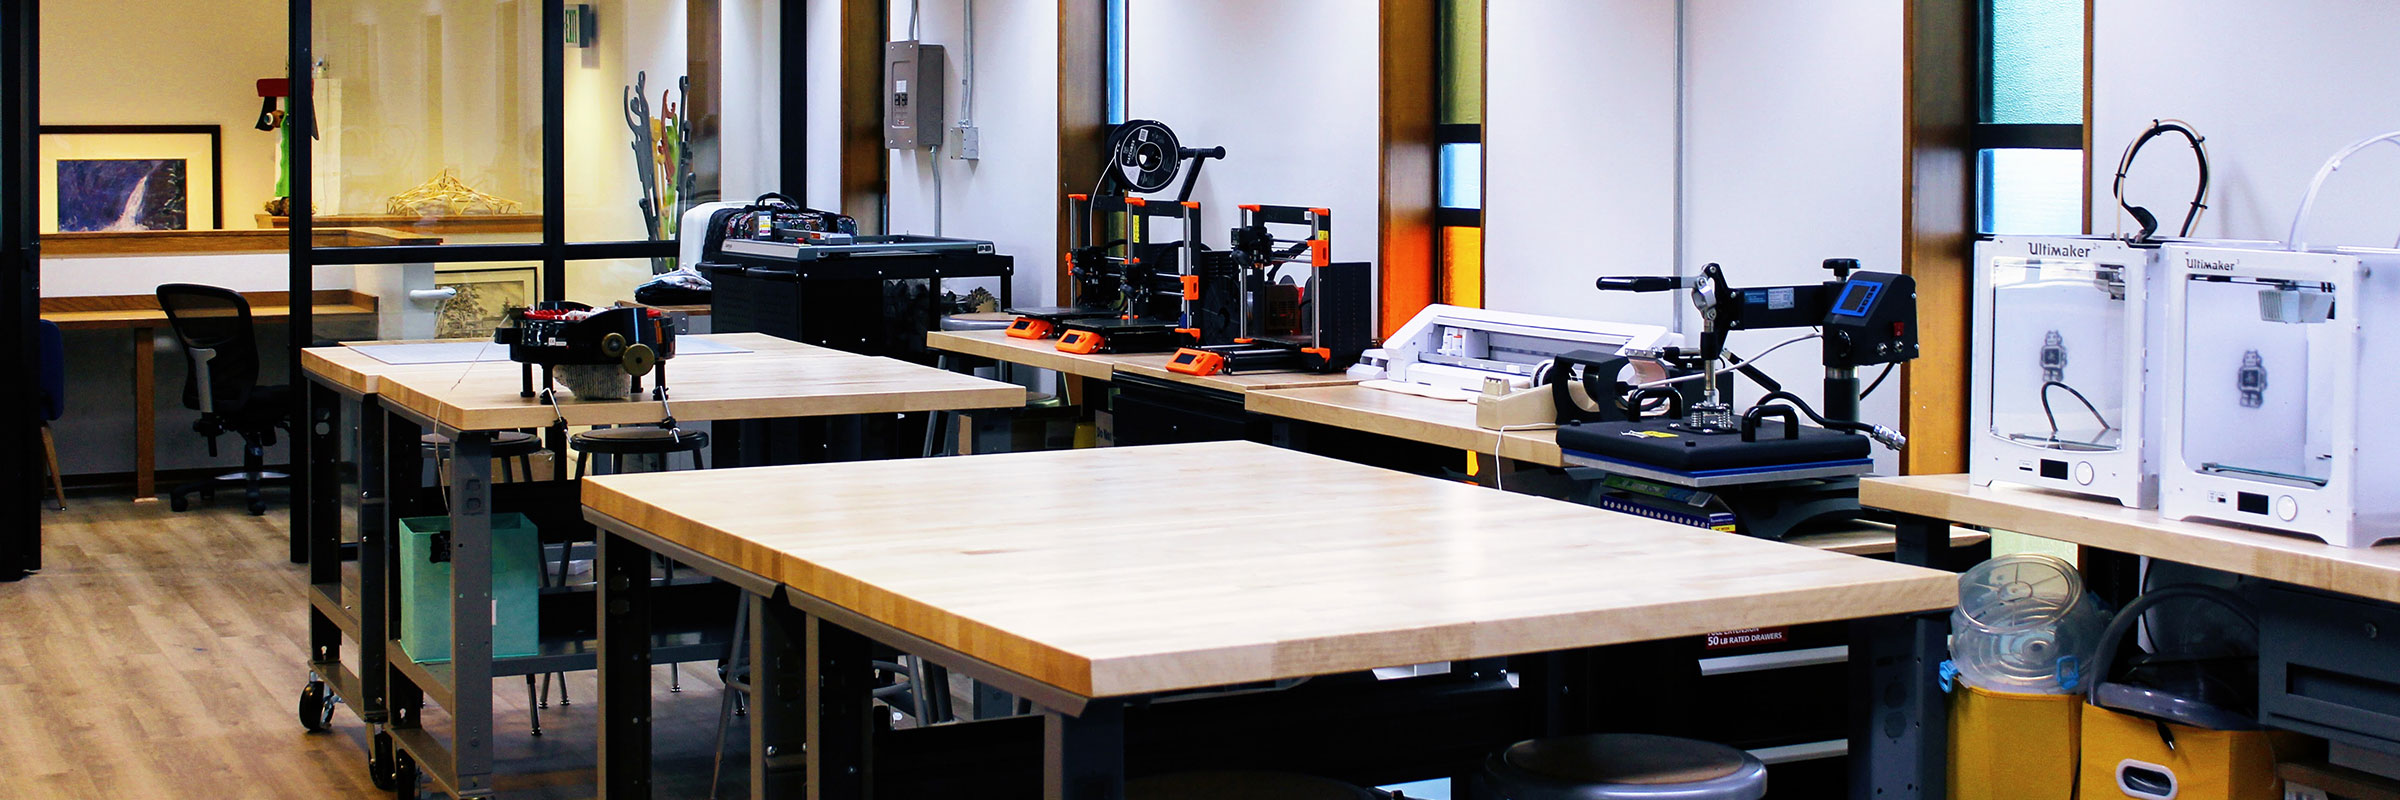 The Dalles Library Makerspace with tables and equipment